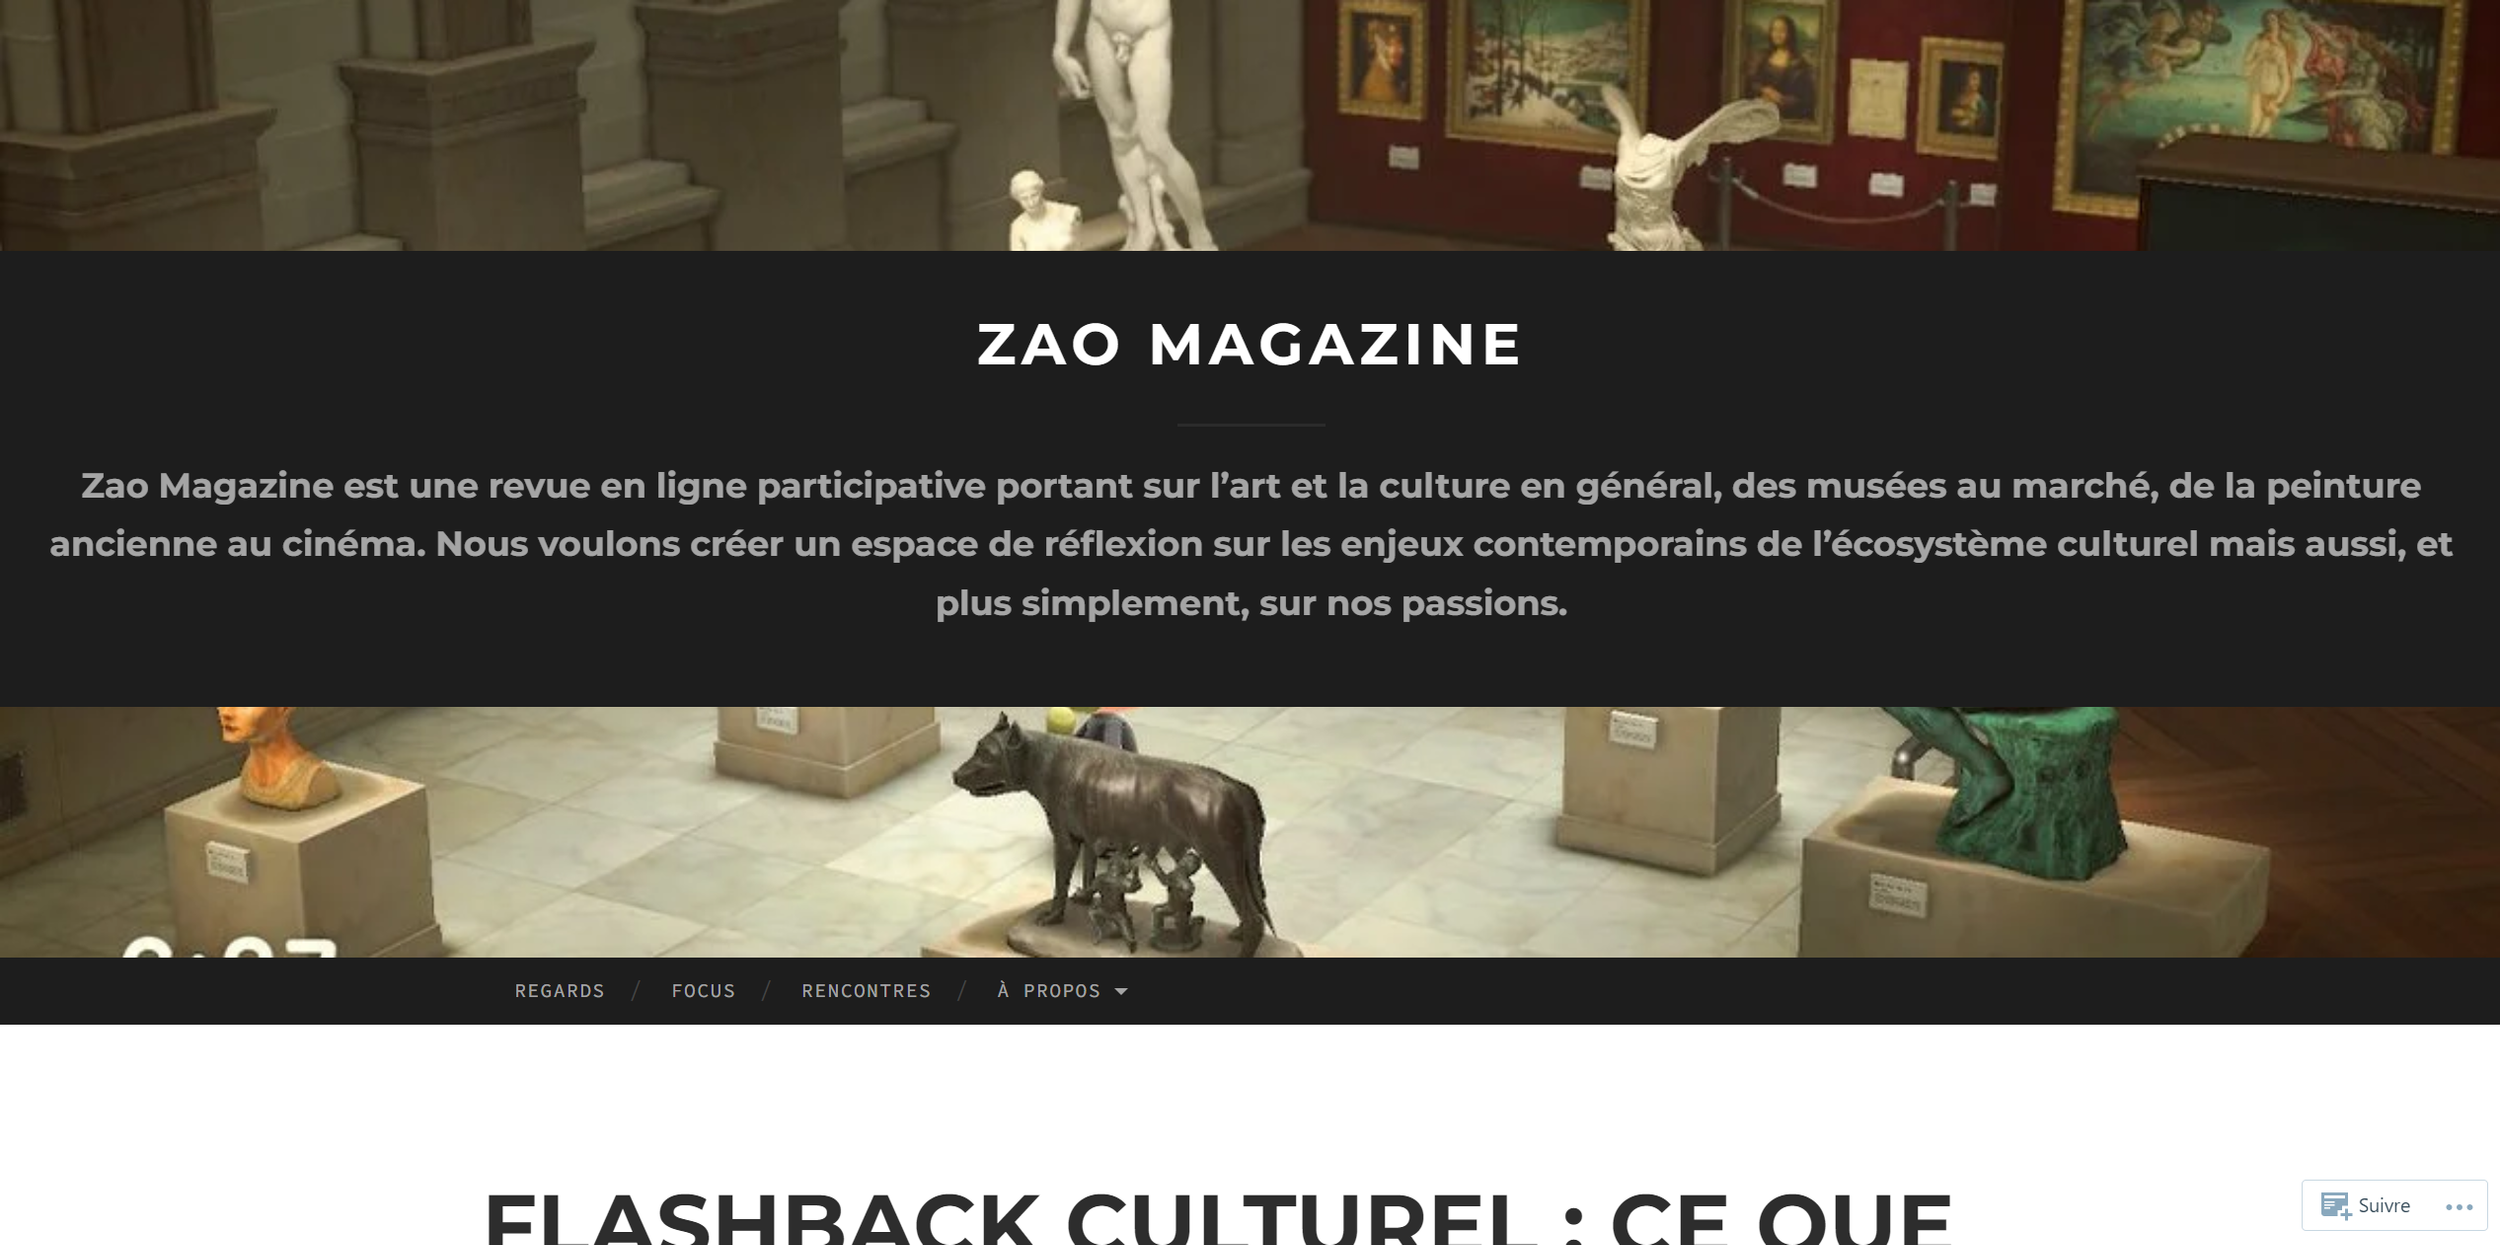 Zao Magazine, article: 2020 Cultural Highlights, France